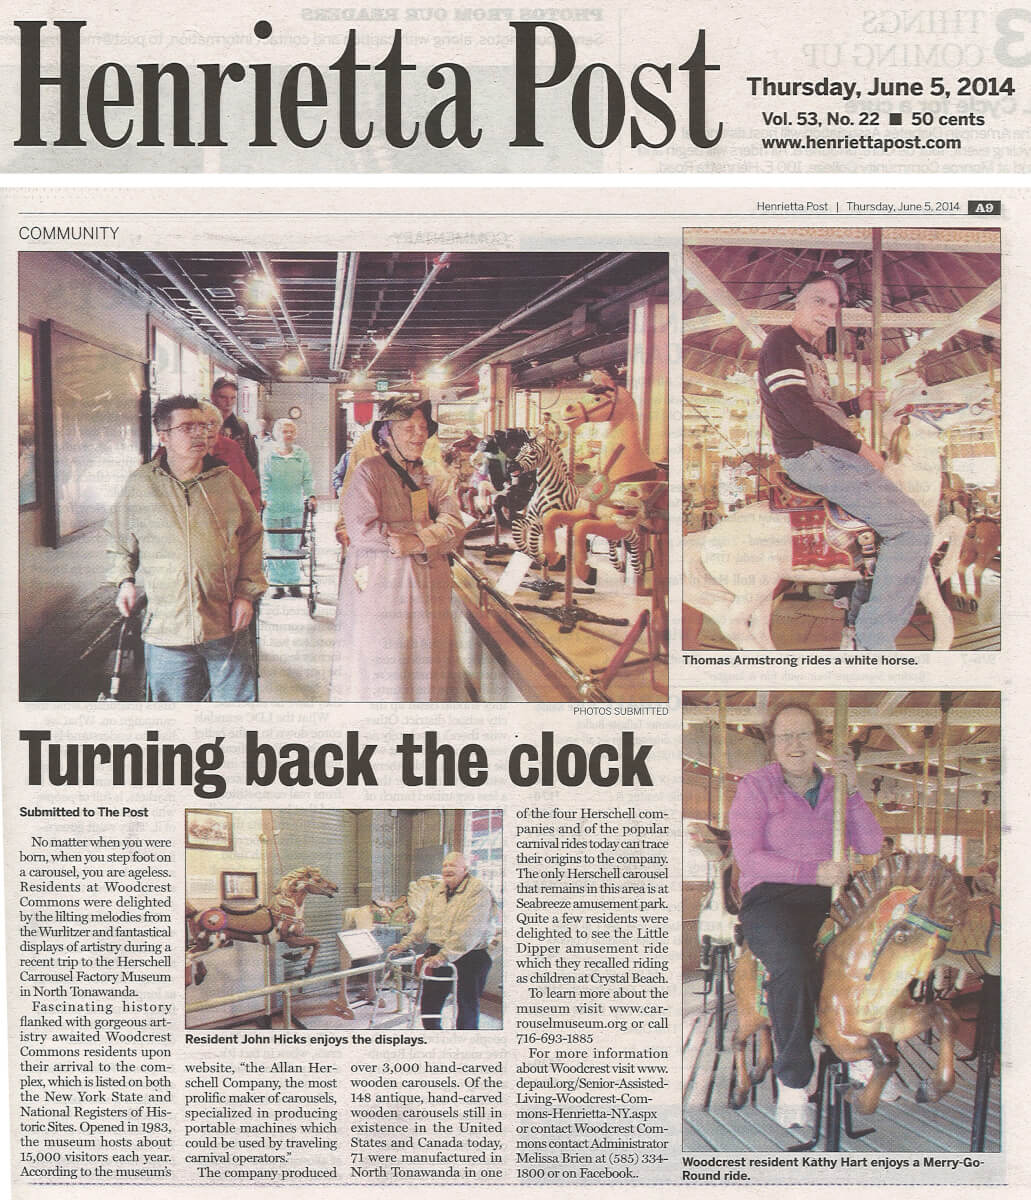 Woodcrest Commons Residents visit the Carousel Museum Story in the Henrietta Post June 5, 2014